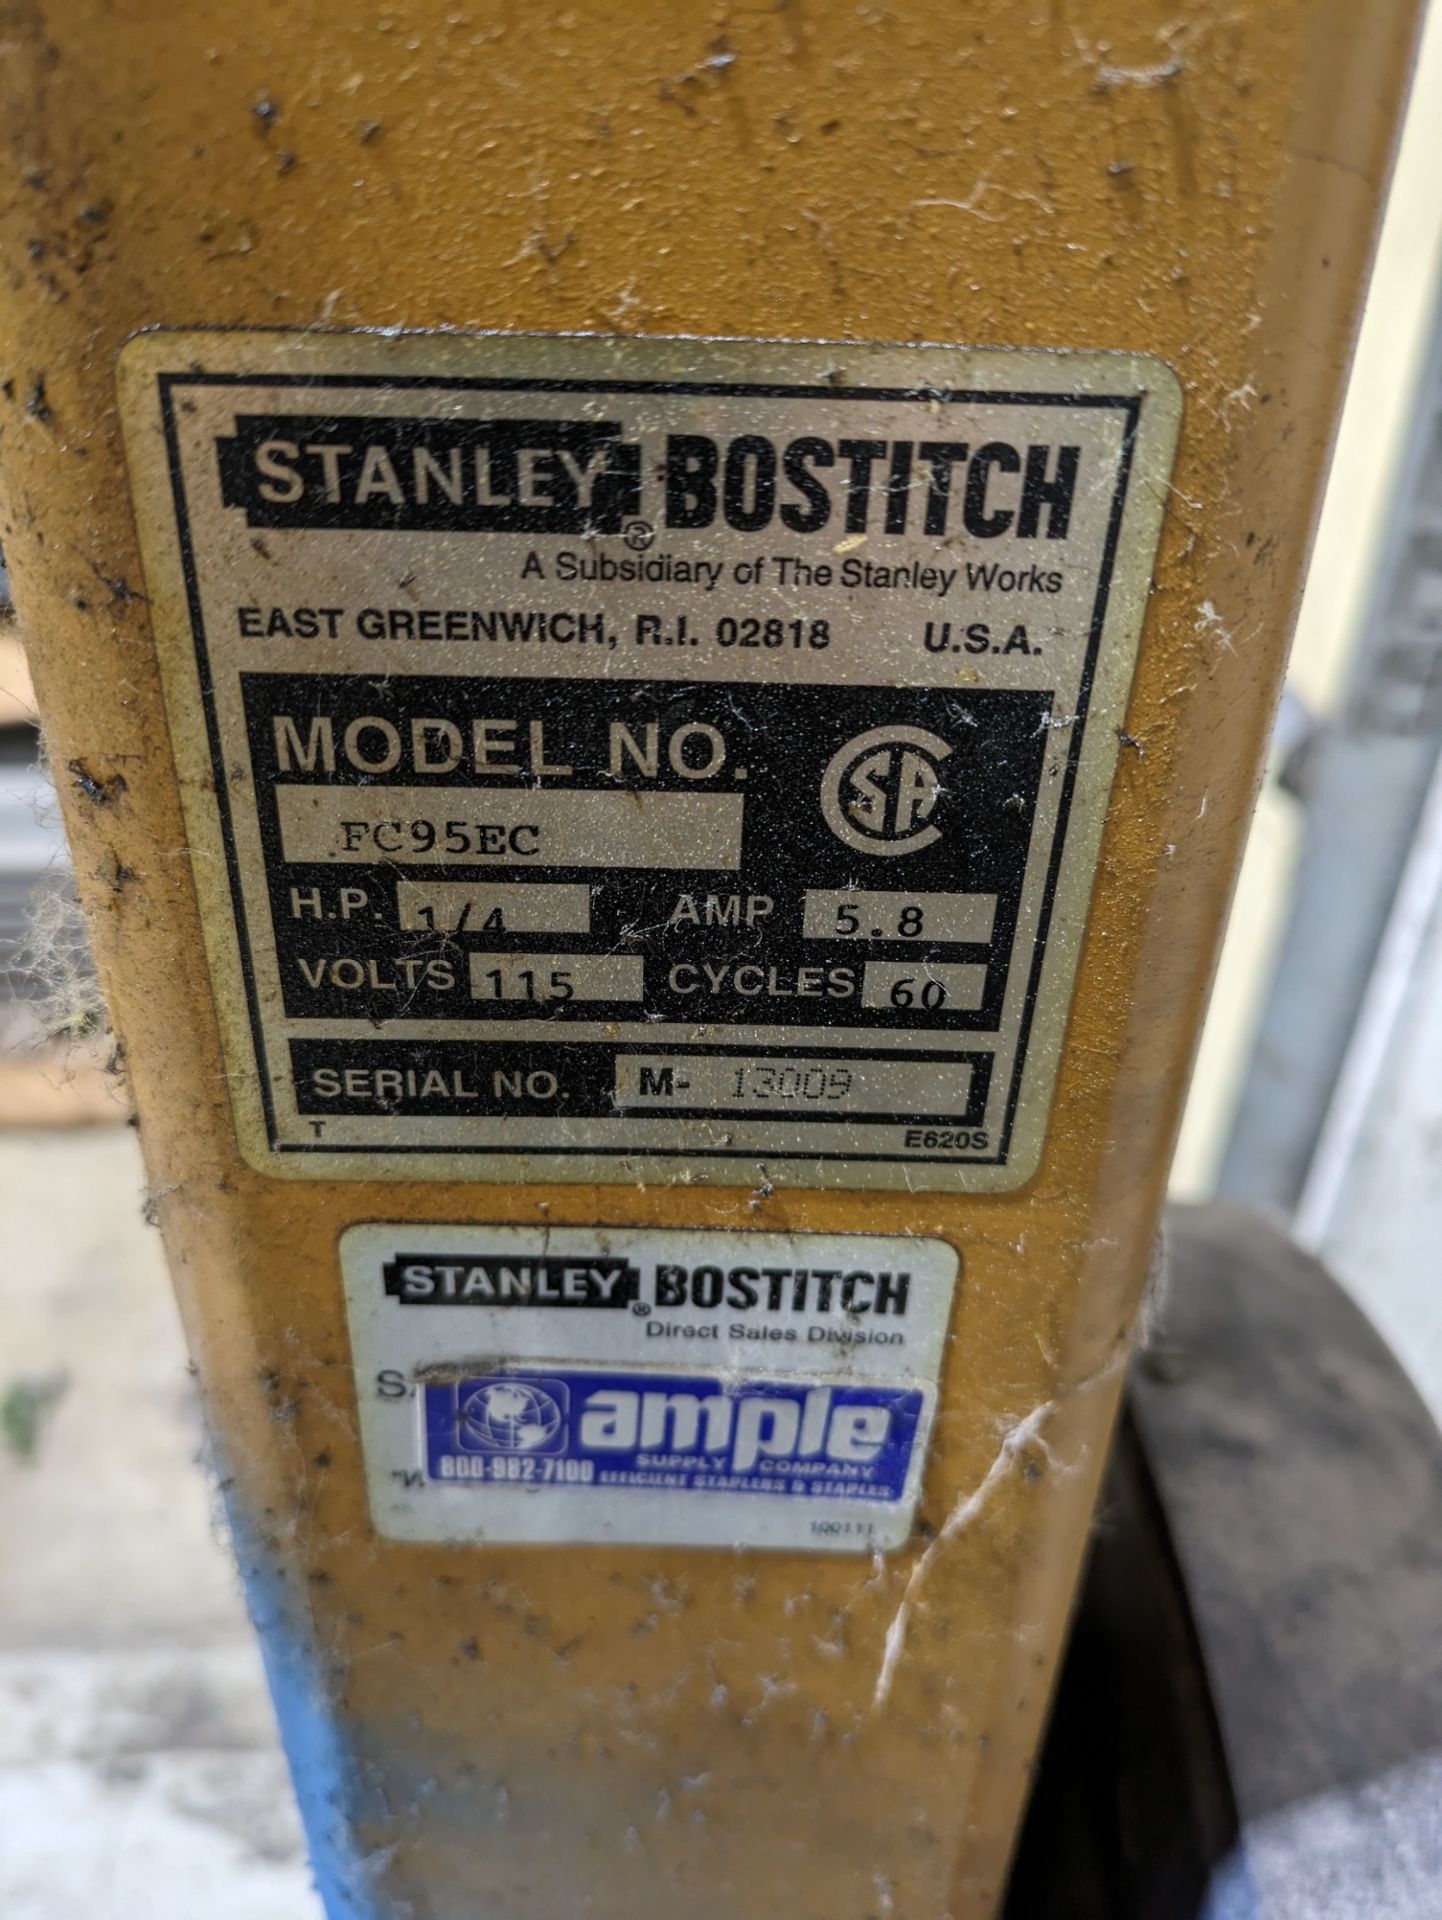 Stanley Bostitch FC95EC Electric Side Arm Box Stapler - Image 3 of 3